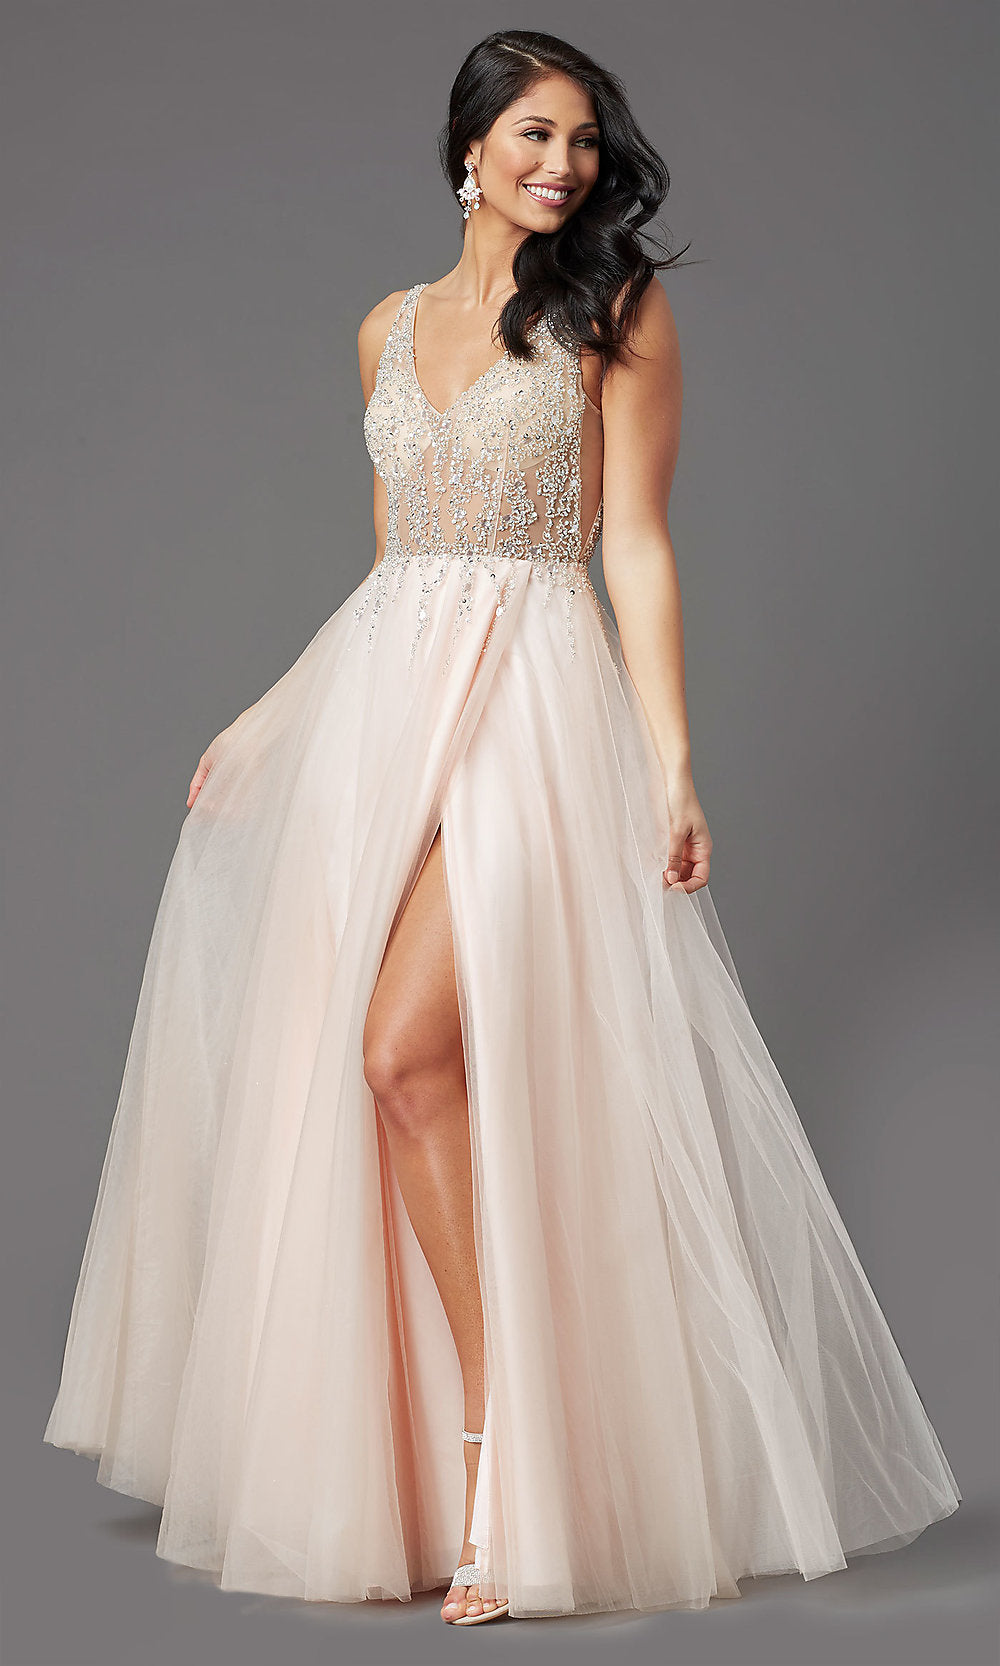 Sheer-Bodice Long Prom Ball Gown by PromGirl